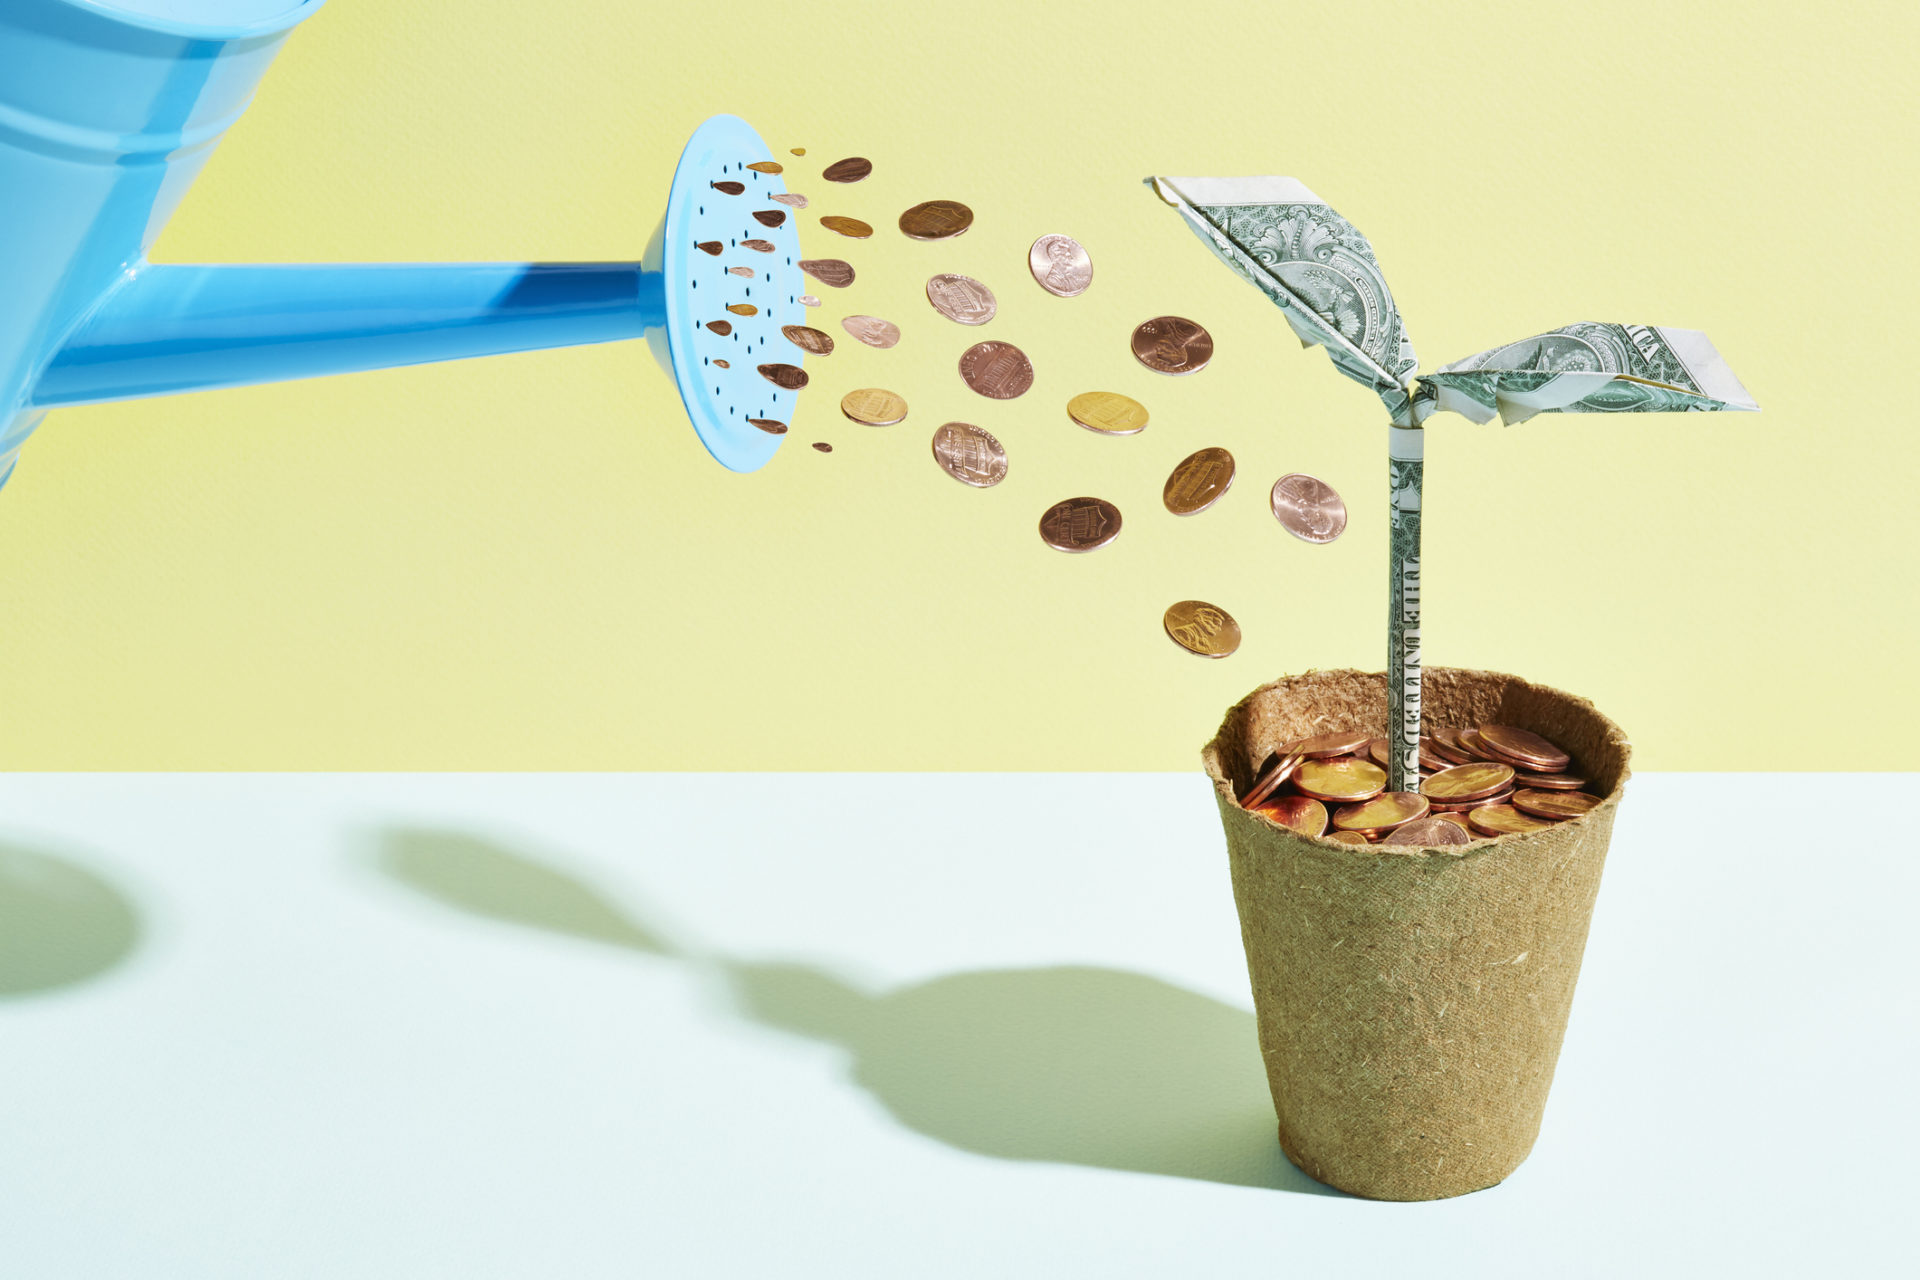 Plant being watered with coins